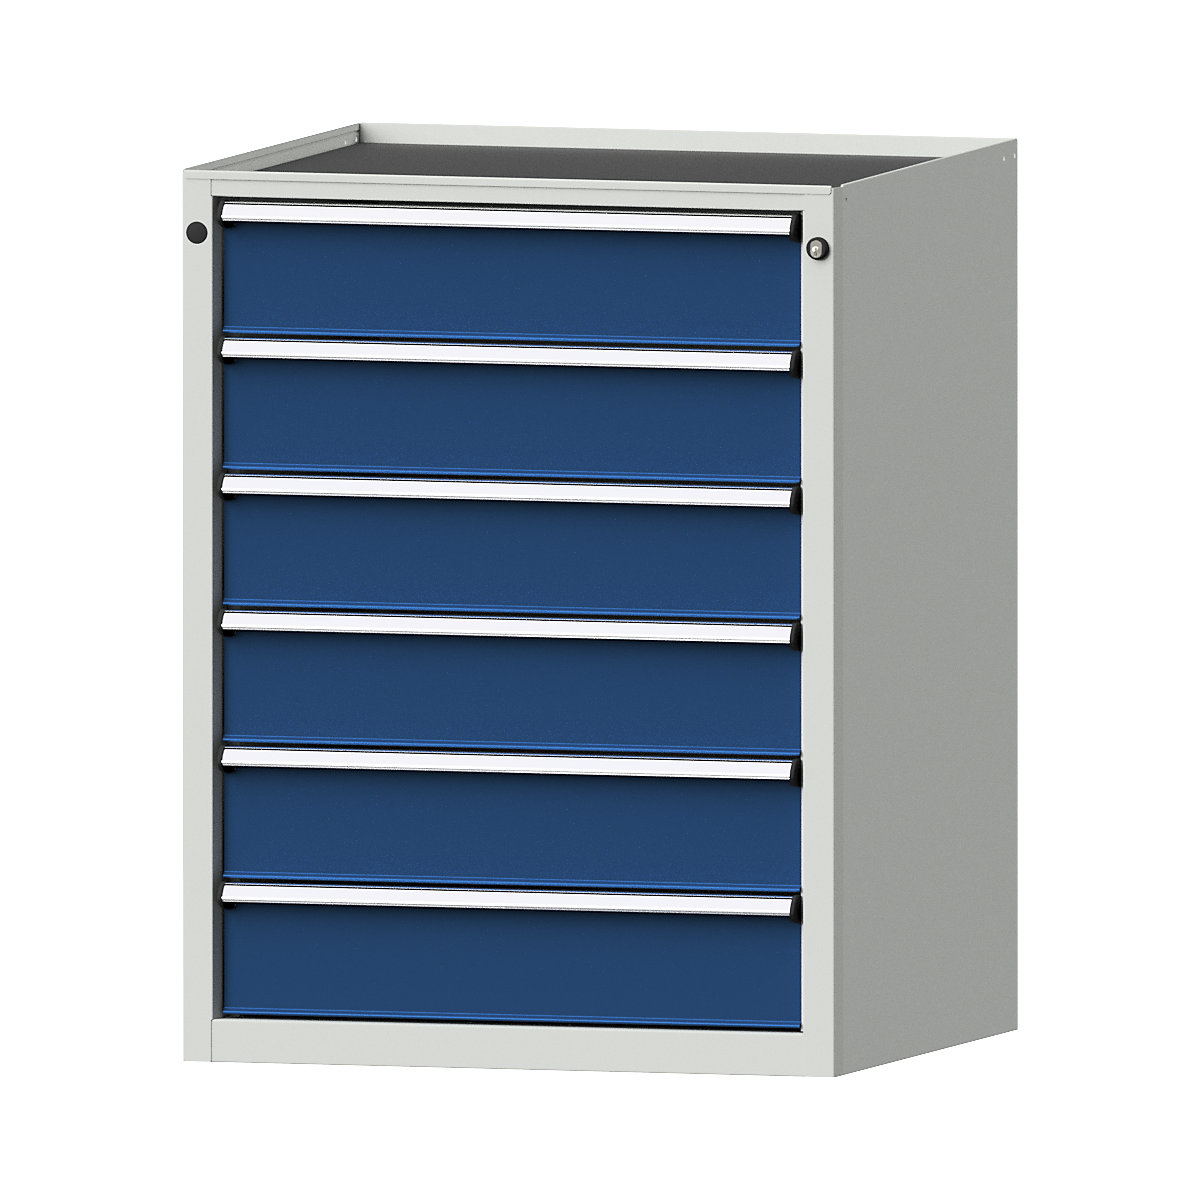 Drawer cupboard – ANKE, WxD 760 x 675 mm, 6 drawers, height 980 mm, front in gentian blue-8